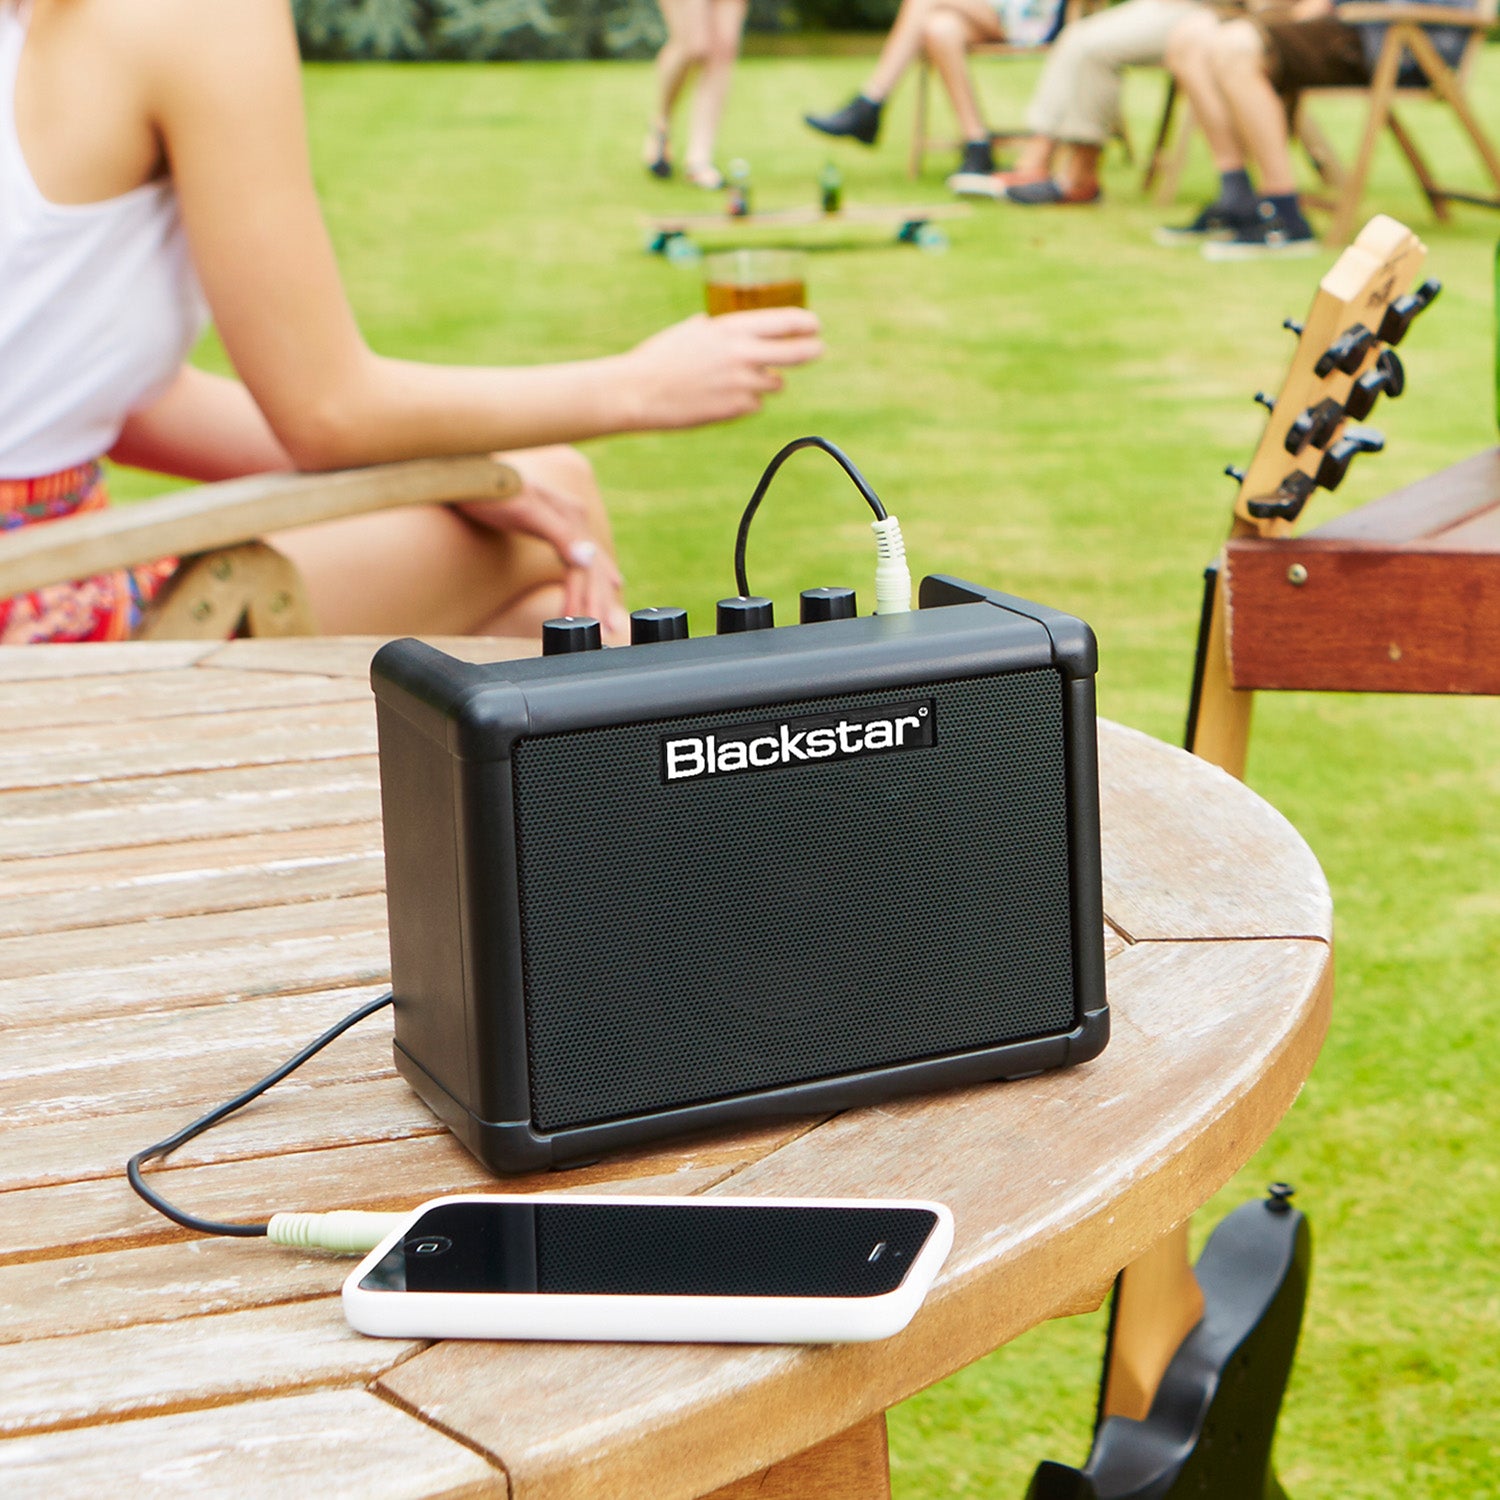 Blackstar Amps FLY mini amp outdoors at a party